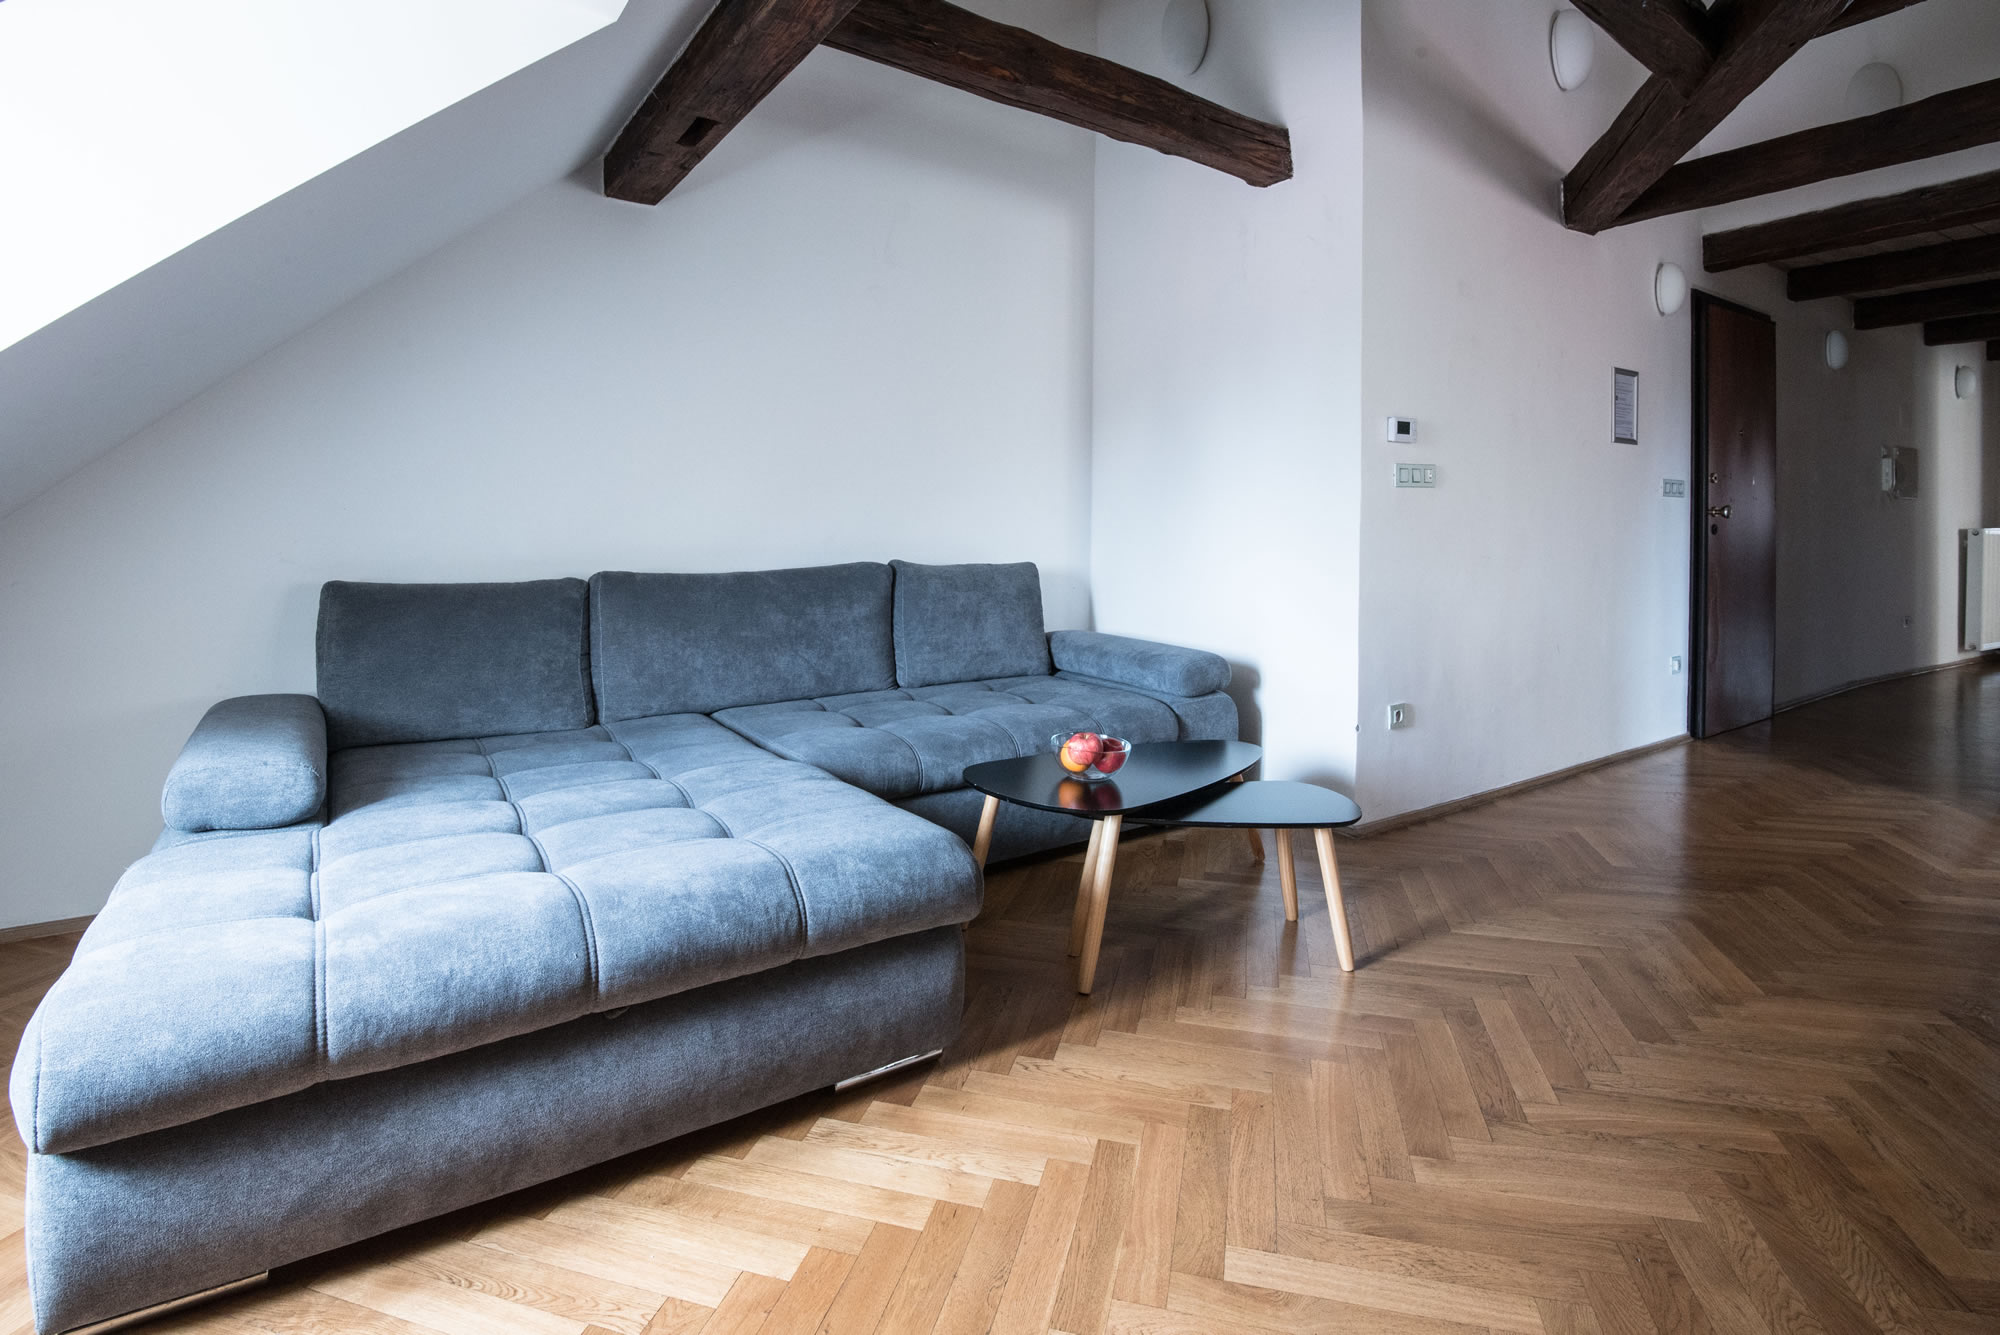 Large attic apartment with wooden beams. A grey sofa with black coffee table dominates the room.